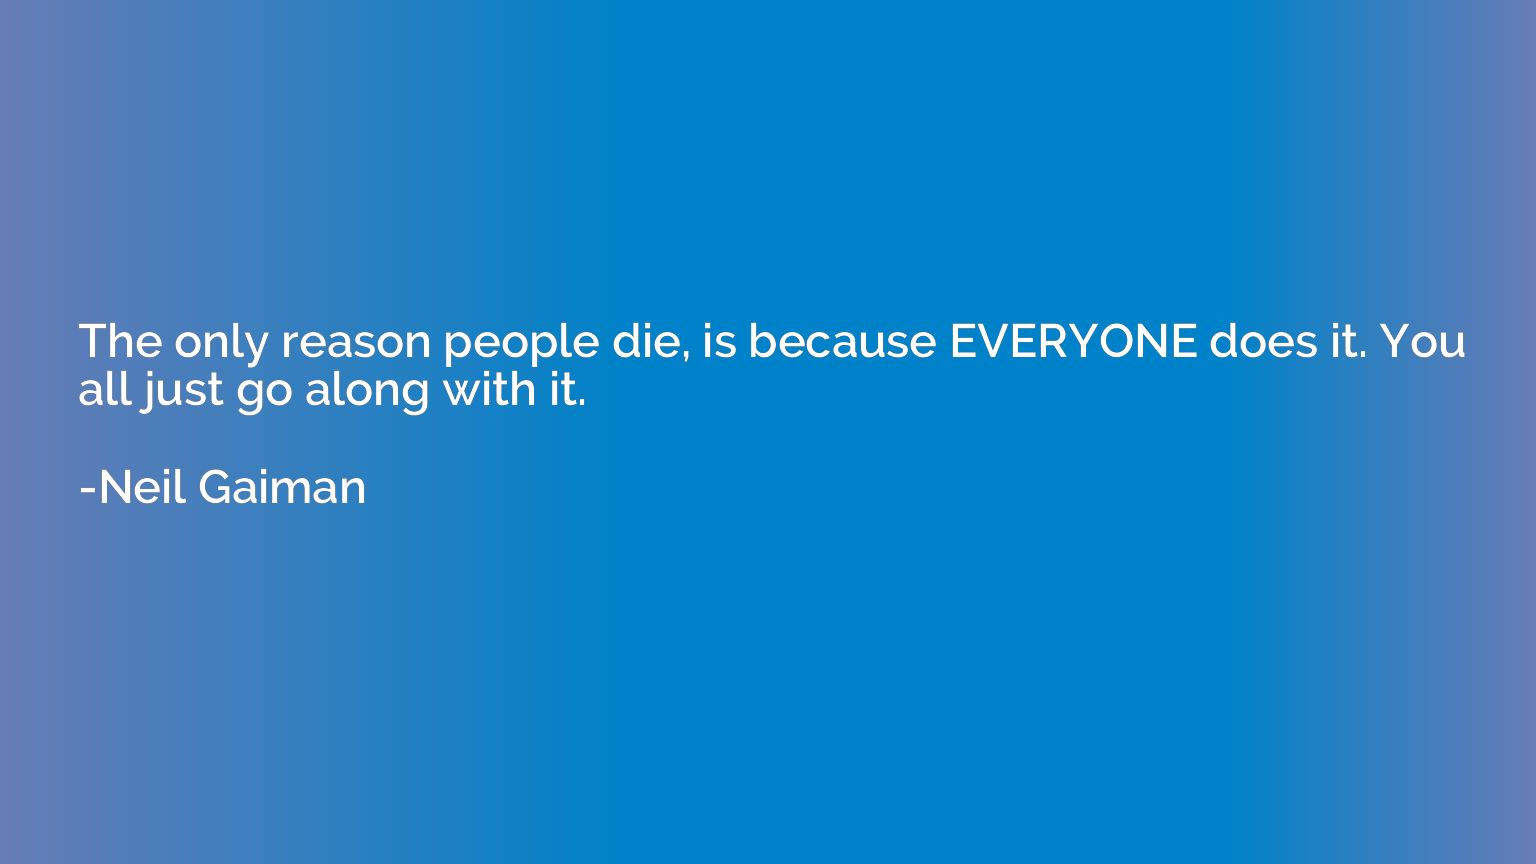 The only reason people die, is because EVERYONE does it. You